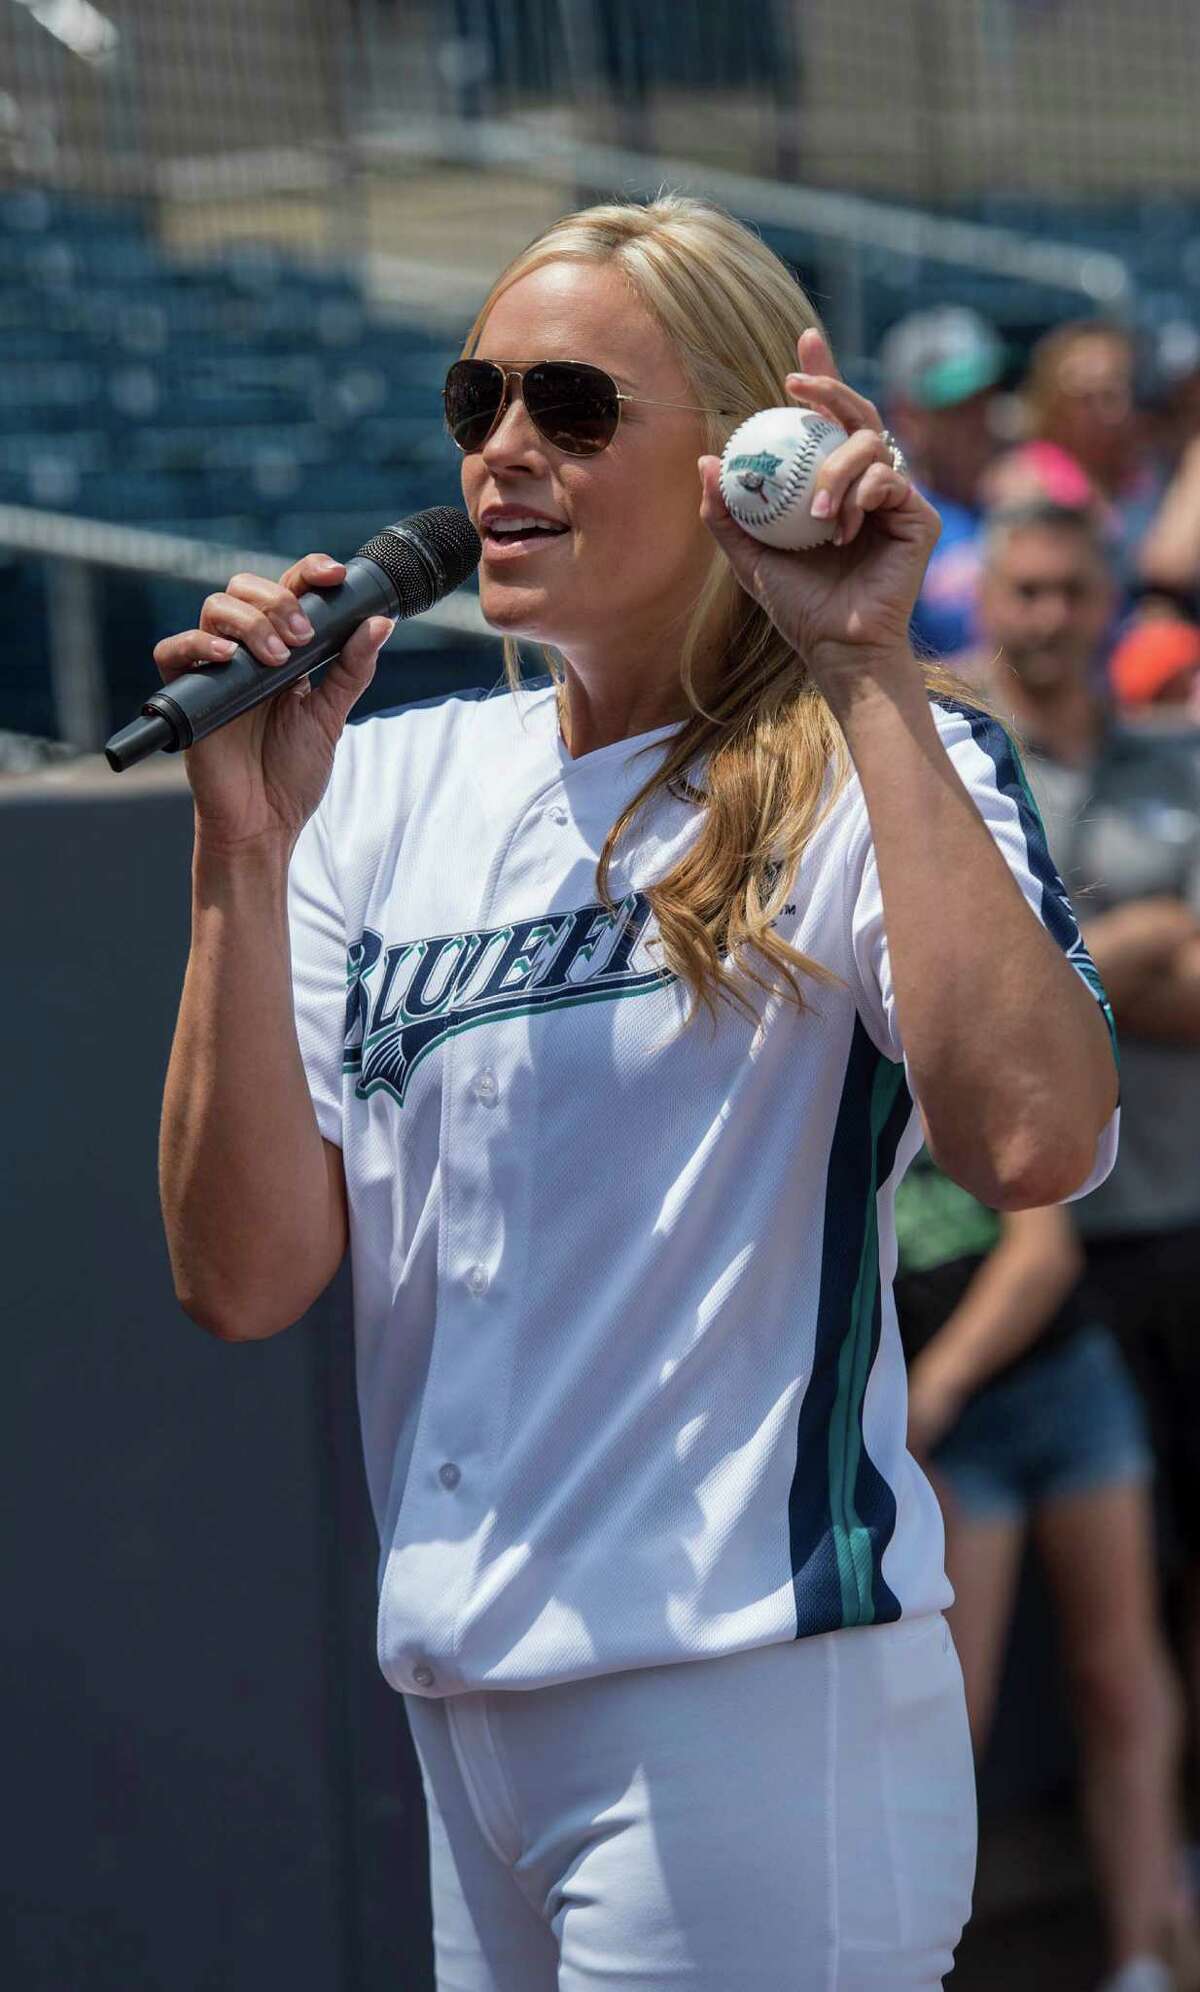 The Bridgeport Bluefish with softball star Jennie Finch as guest manager against the Southern Maryland Blue Crabs during a baseball game played at the Ballpark at Harbor Yard, Bridgeport, CT on Sunday, May 29, 2016.